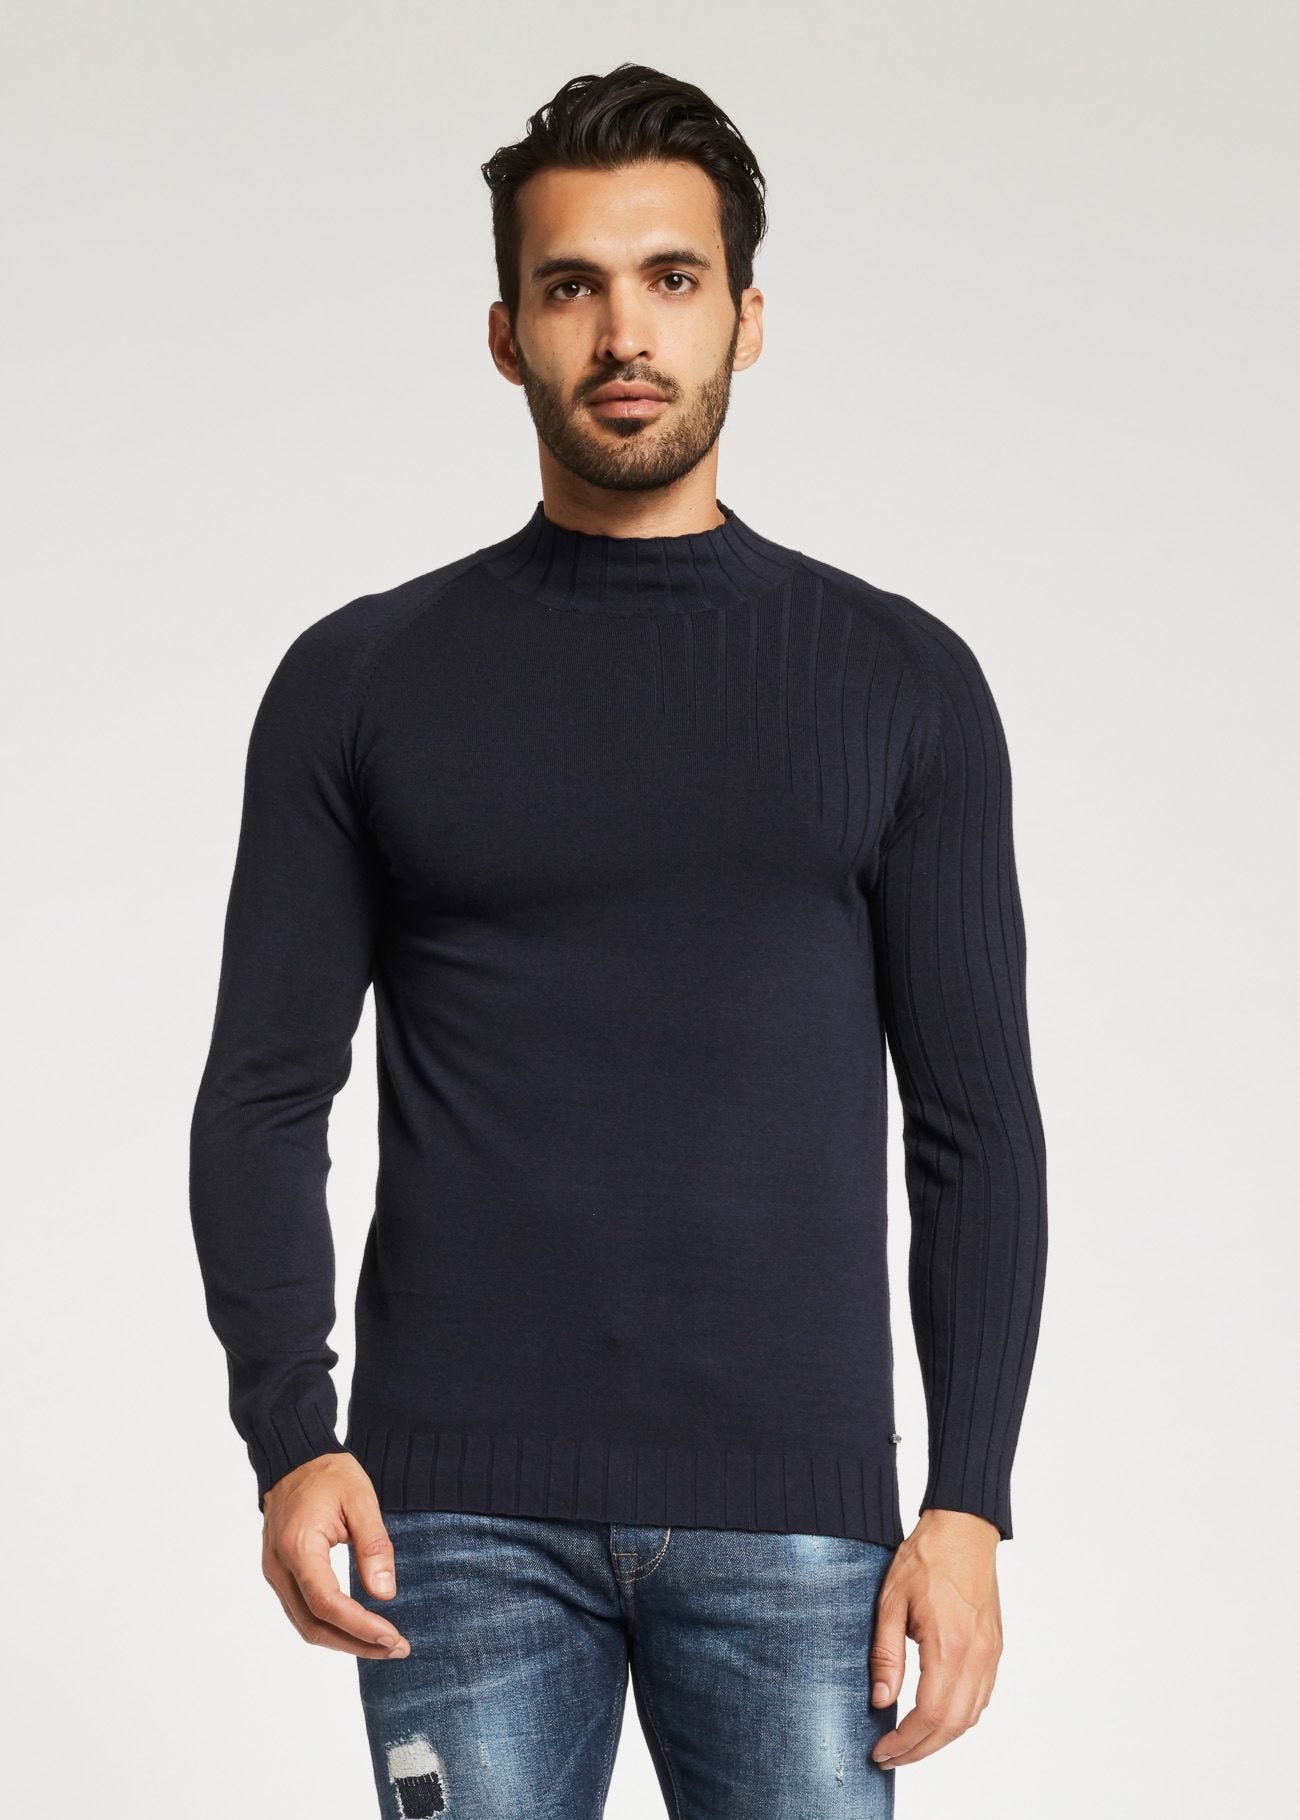 Jumper with funnel neck